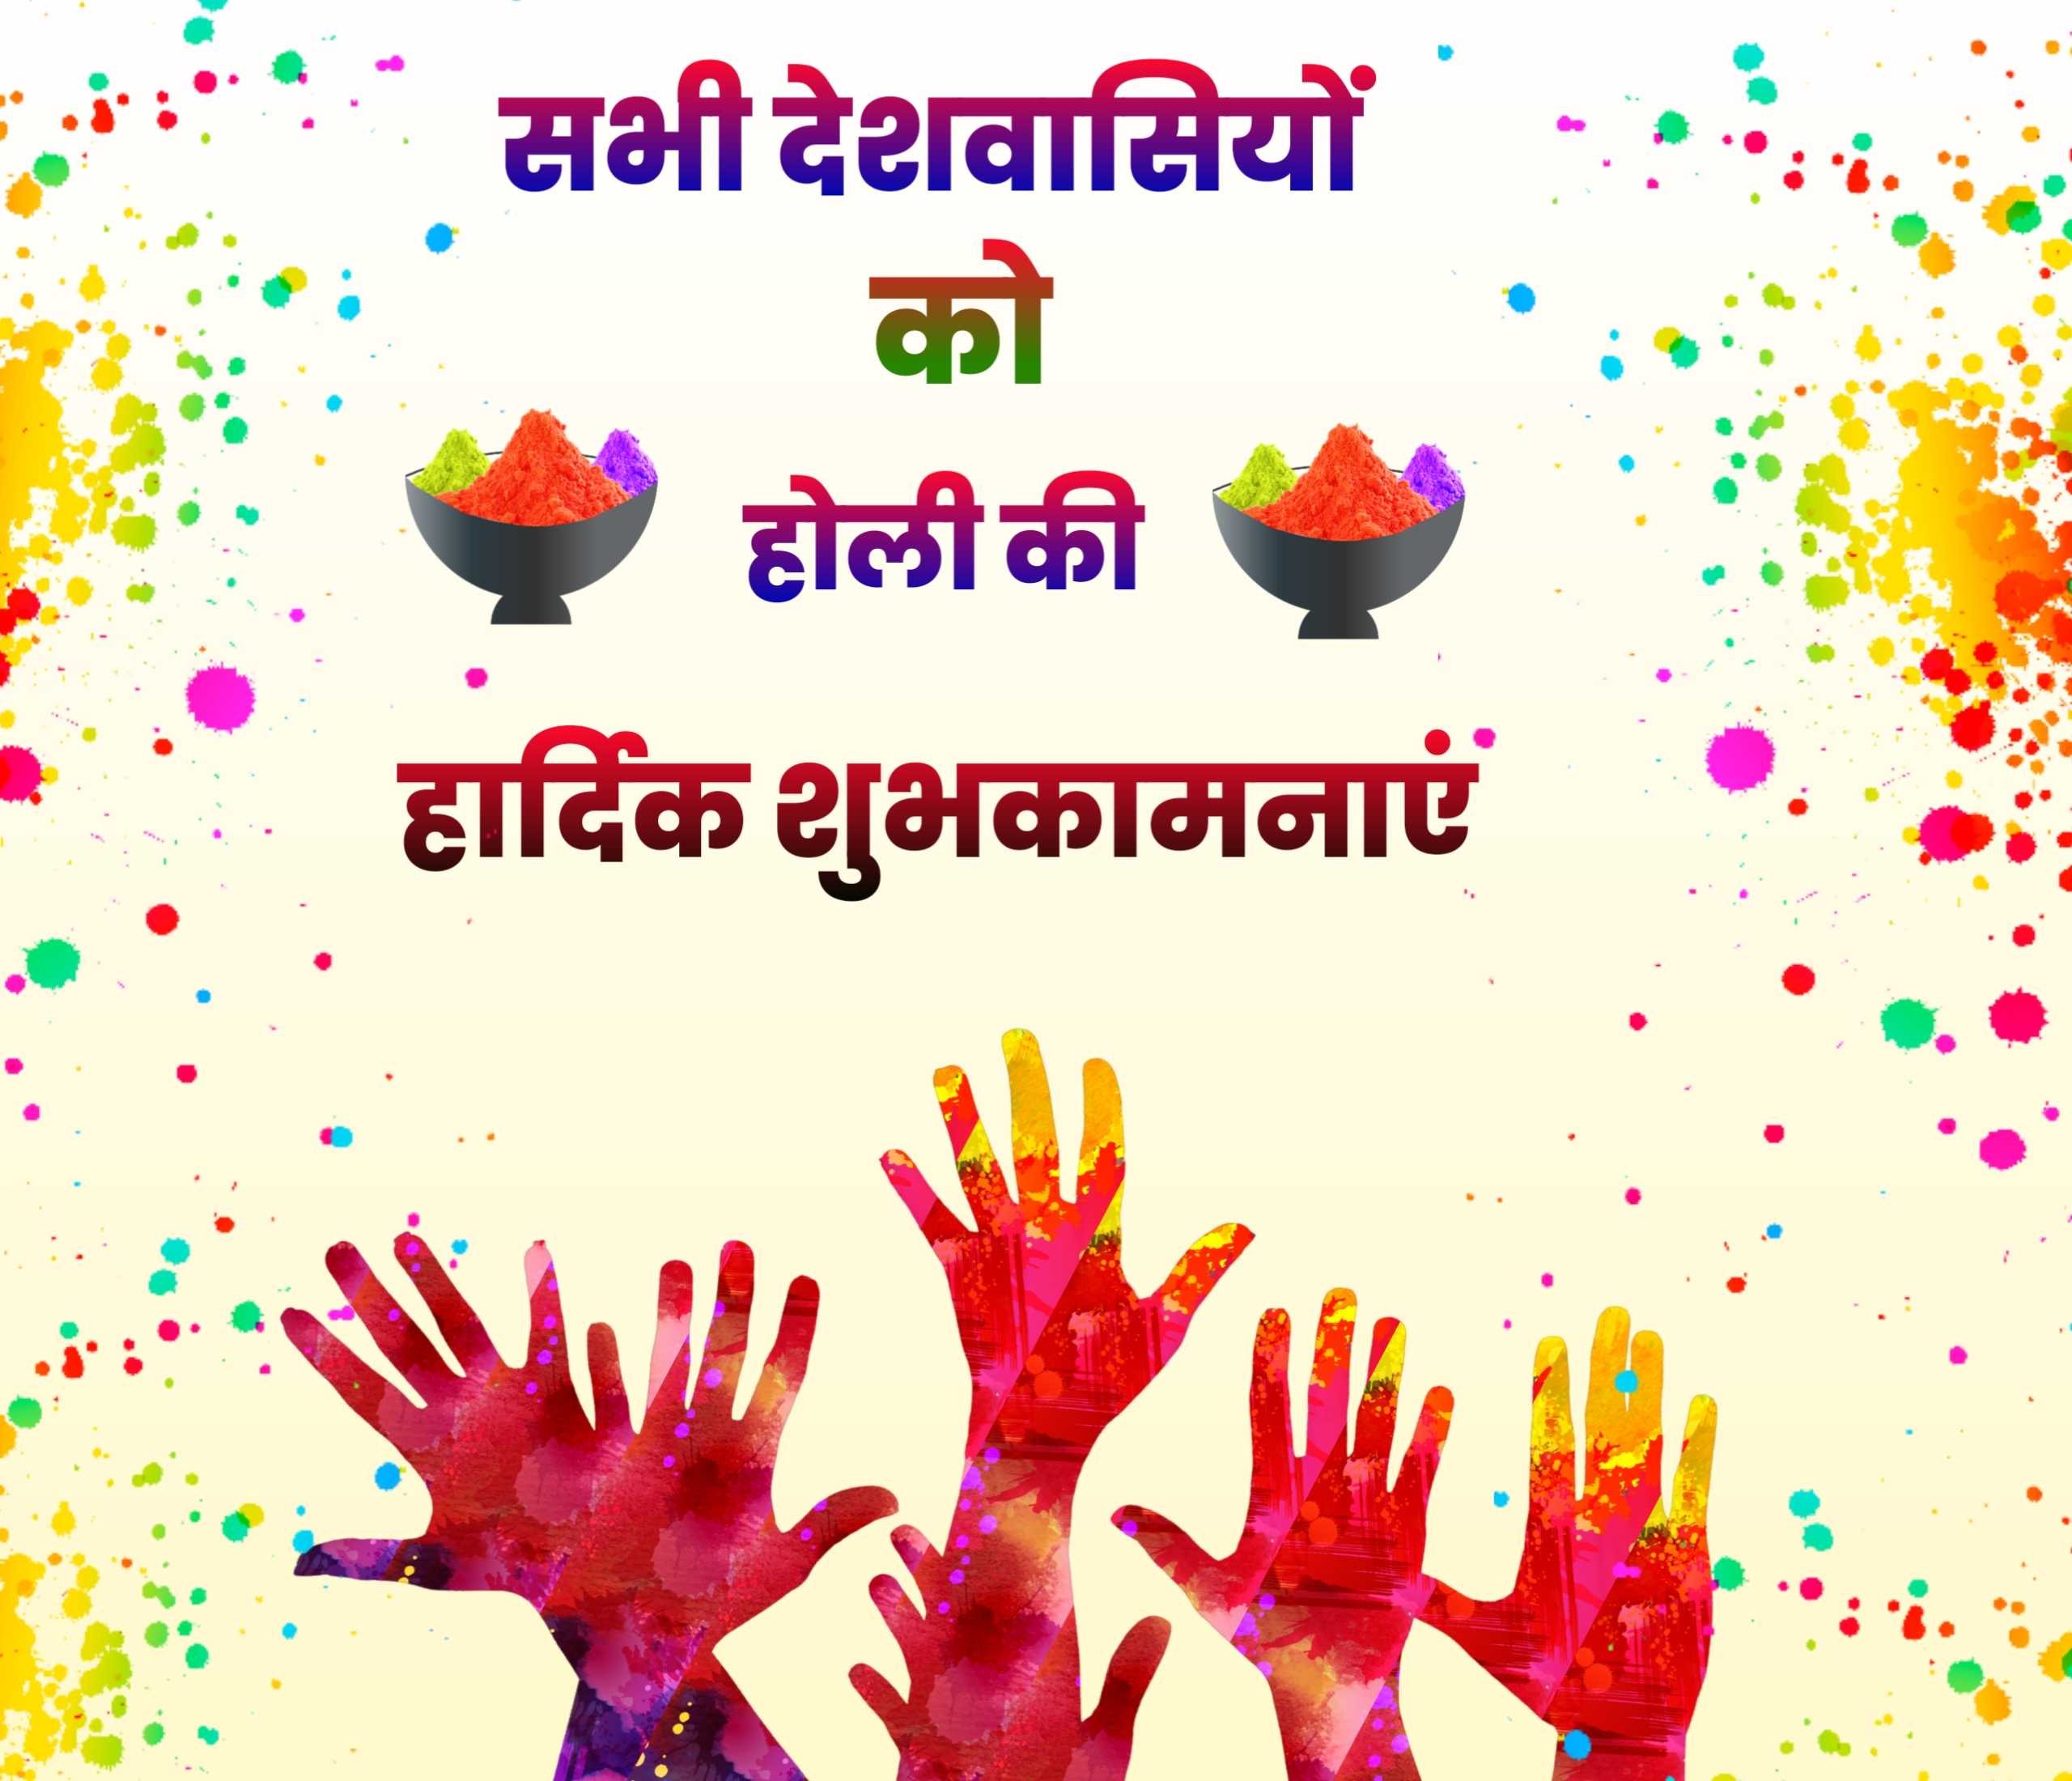 Happy Holi Image With Hand Color 